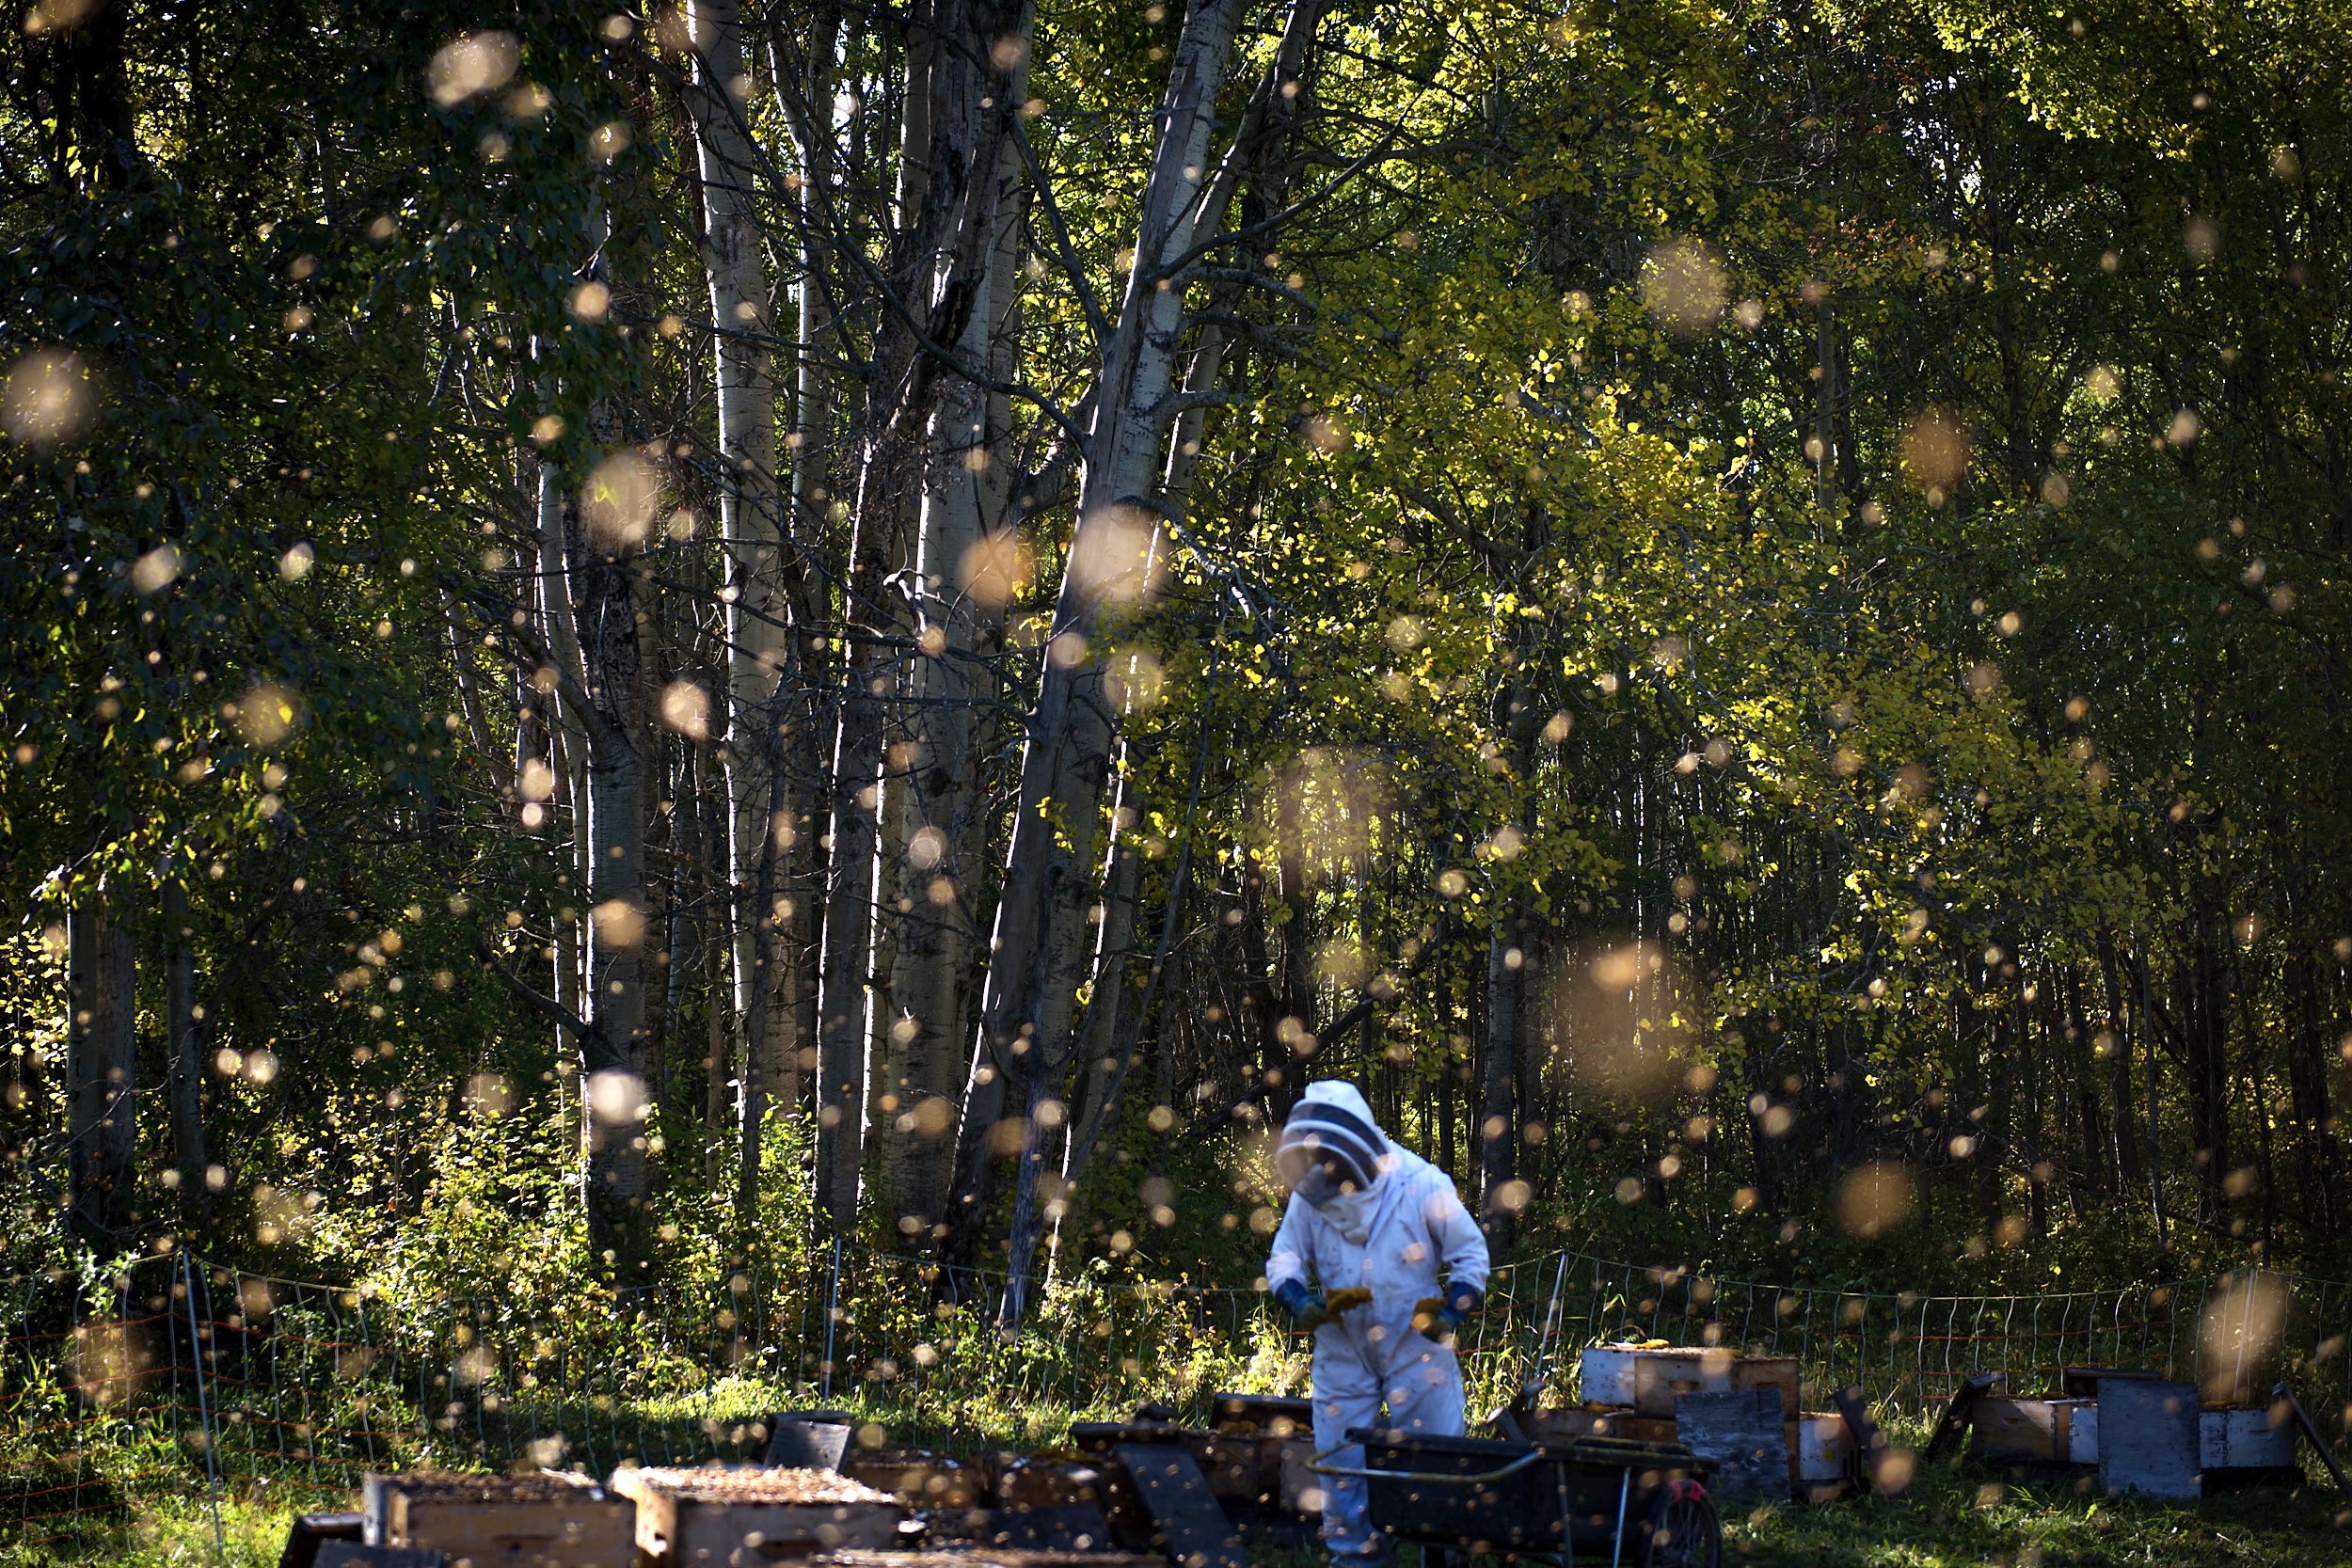  A beekeeper is surrounded by honeybees while working on a bee colony in Northern Alberta.  